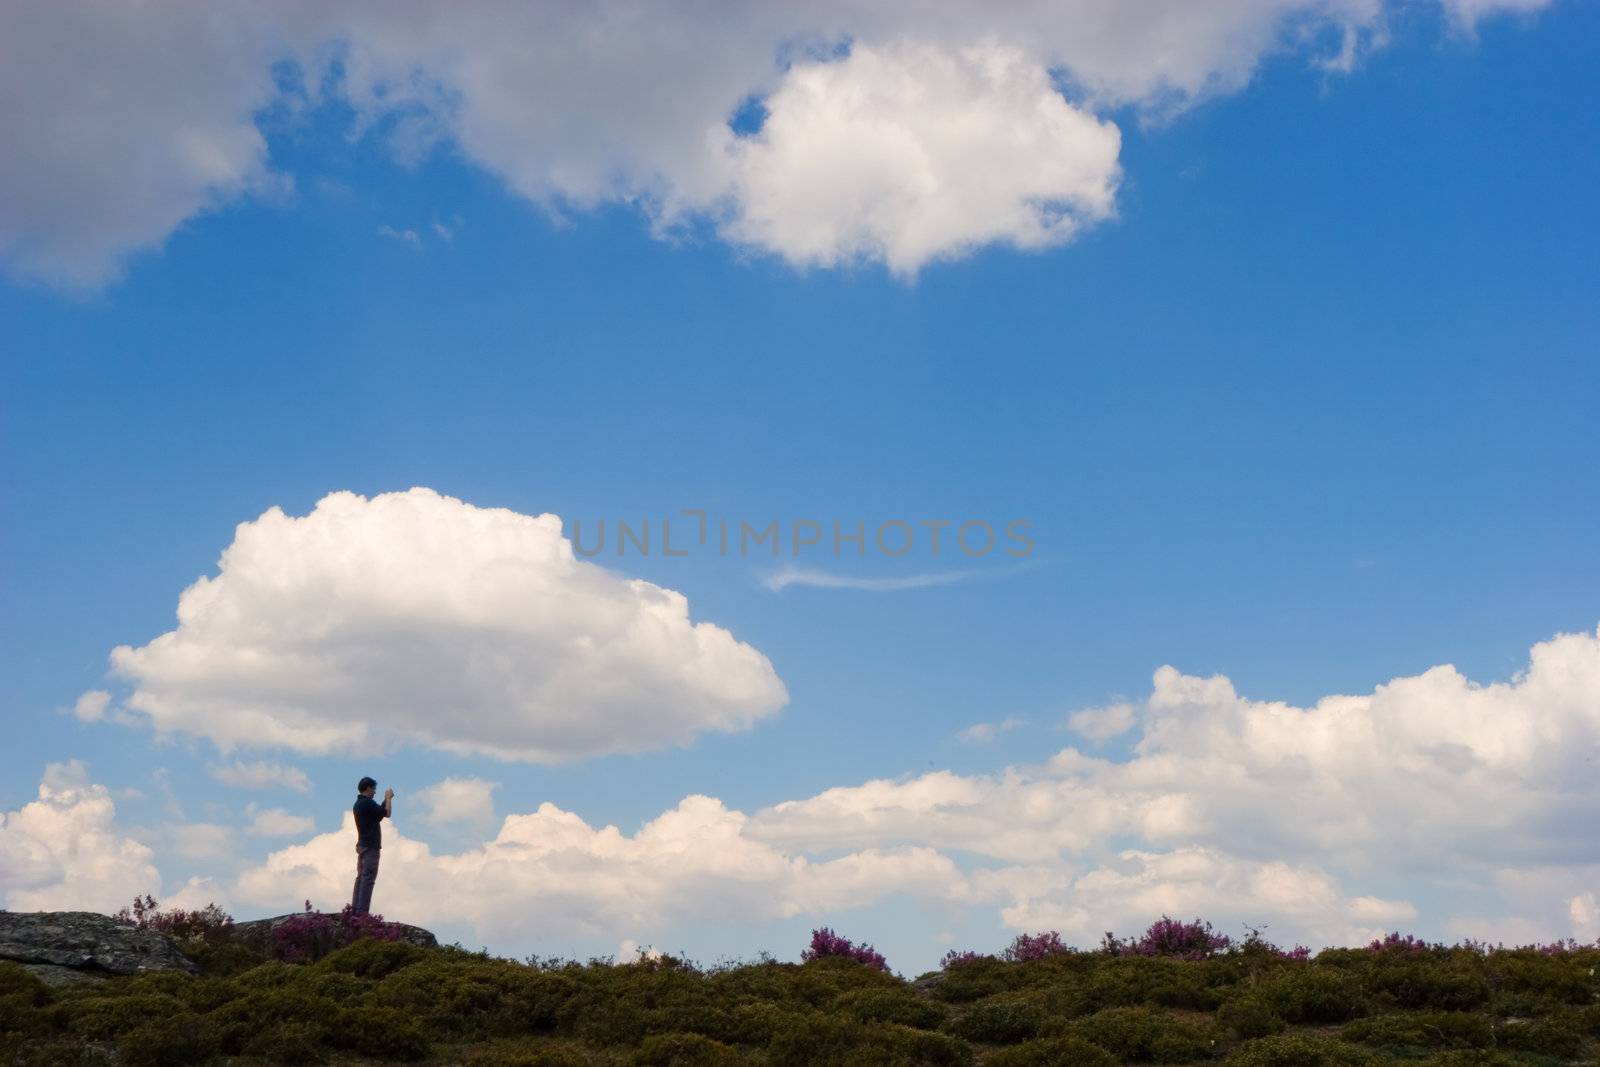 Man meditating outdoors. Beautiful sky with fluffy white clouds